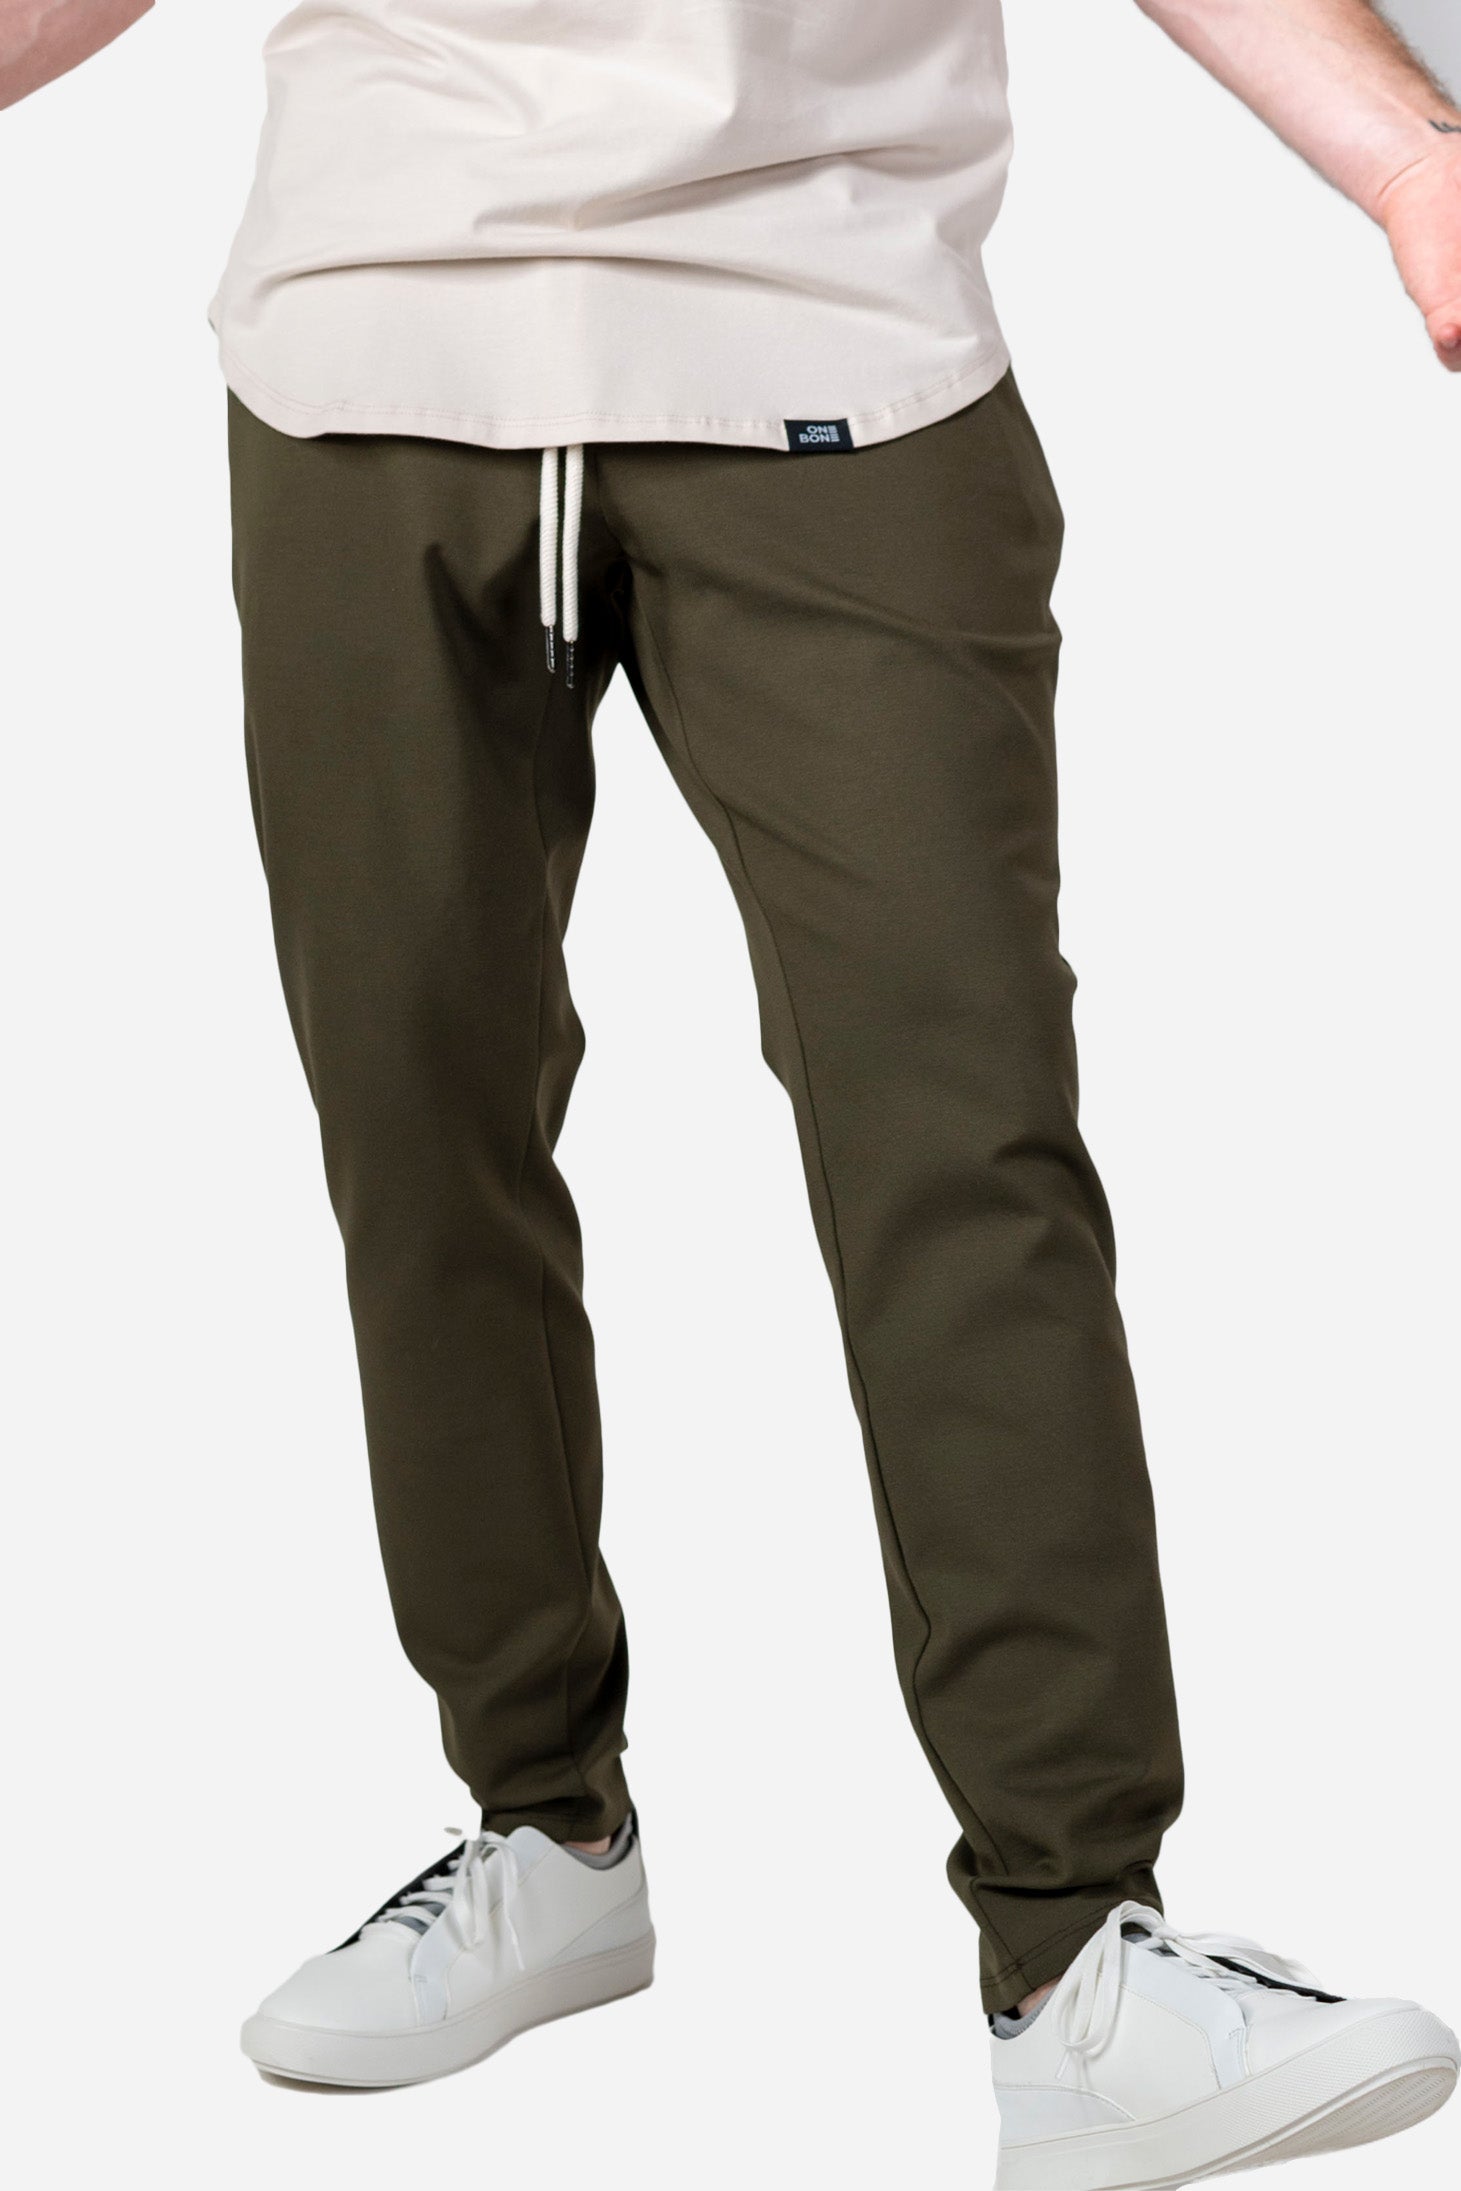 Outwork Pant - Military Green